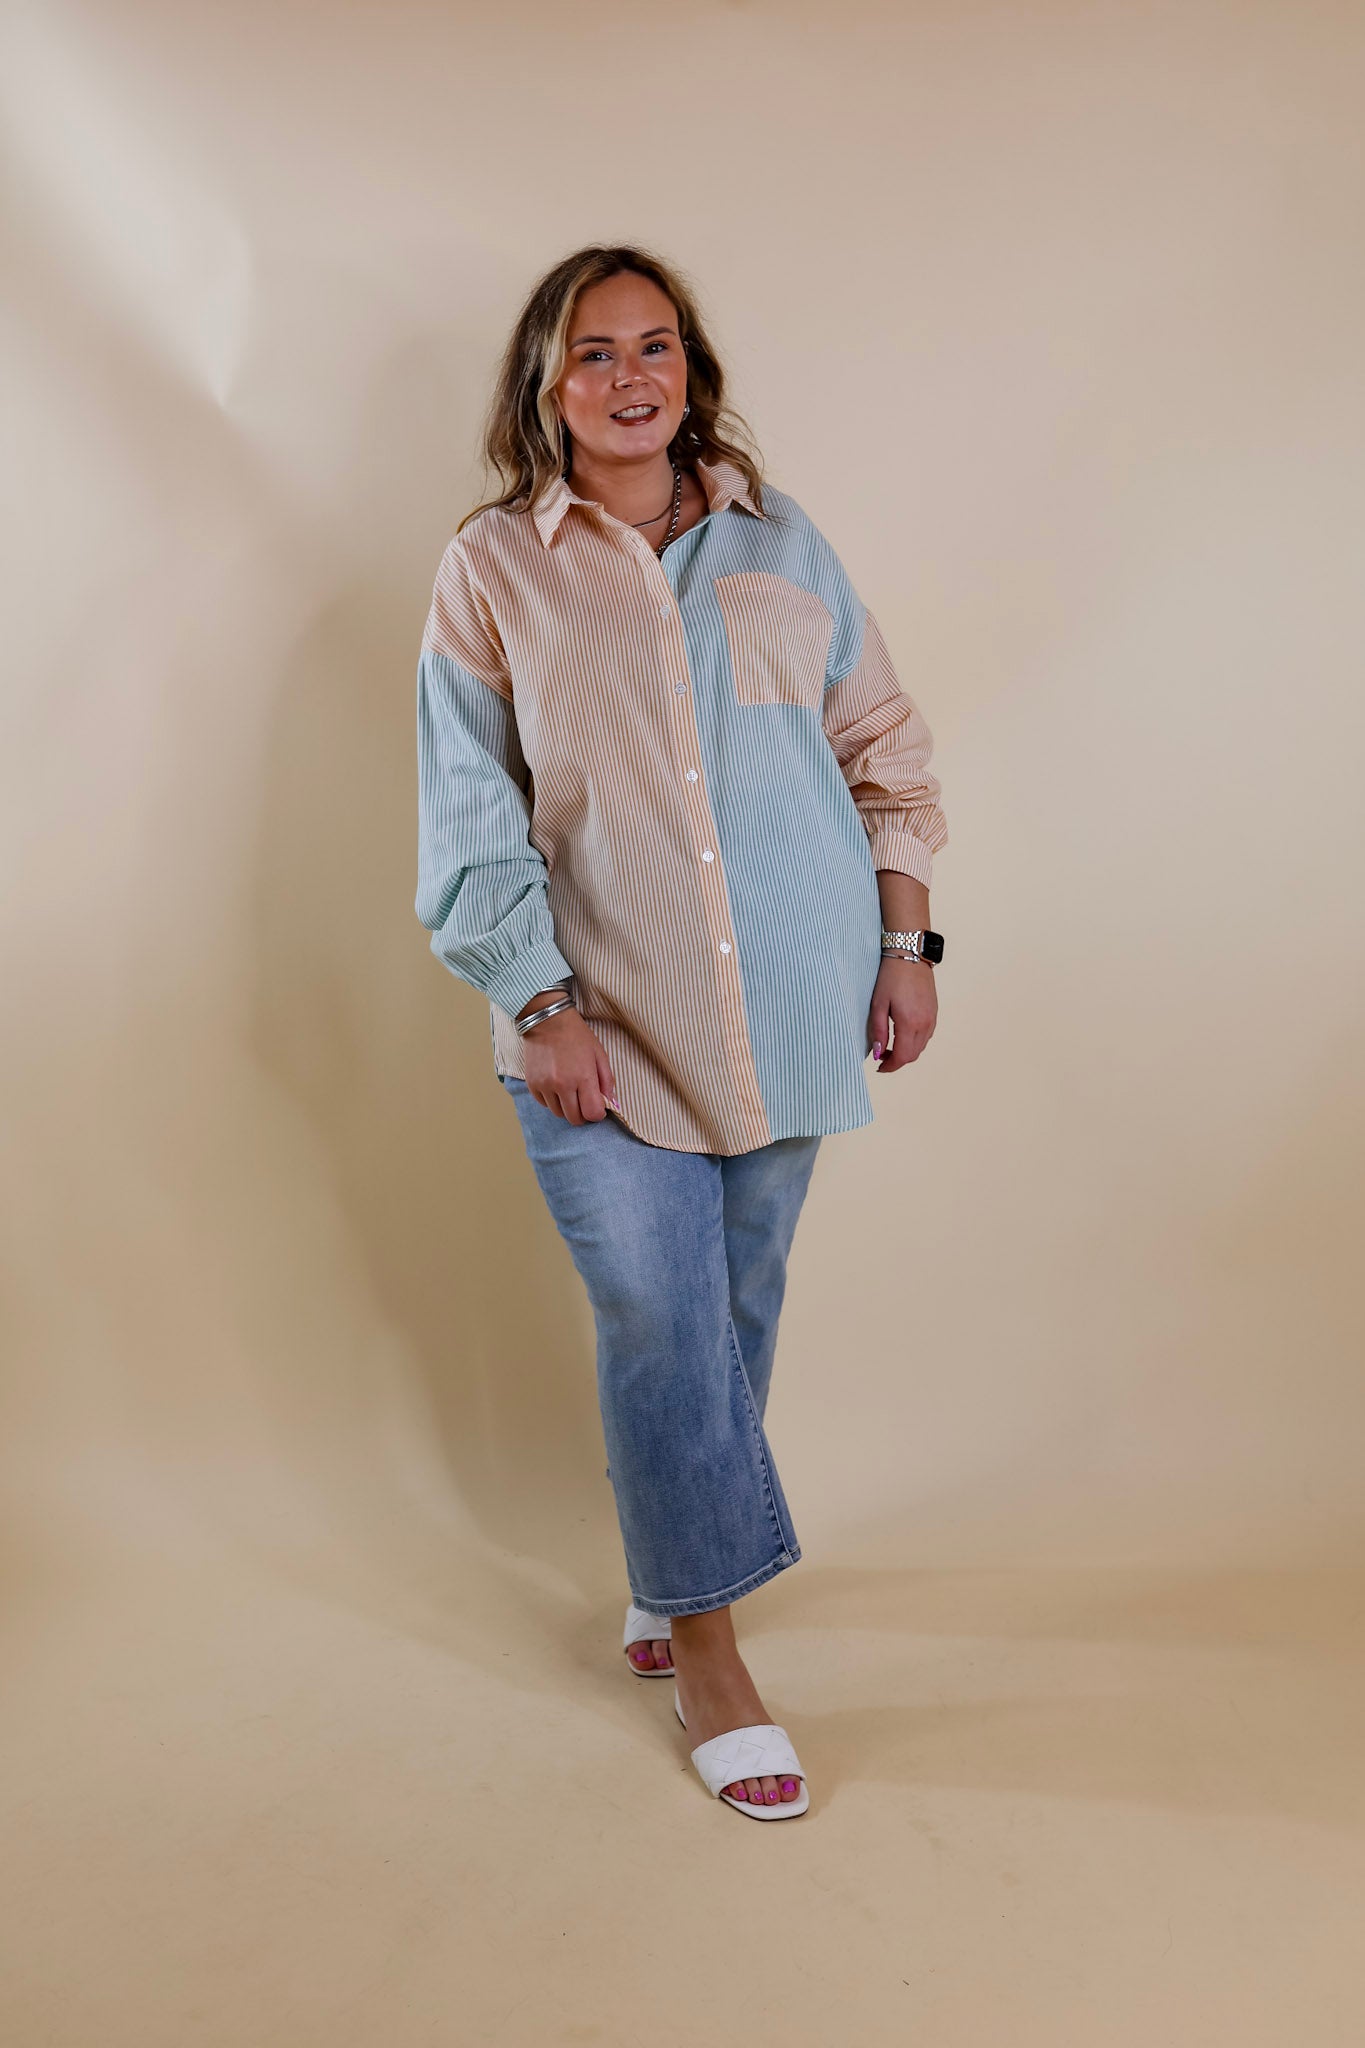 Simply Polished Pin Stripe Long Sleeve Button Up Top in Sage Green and Mustard Yellow - Giddy Up Glamour Boutique